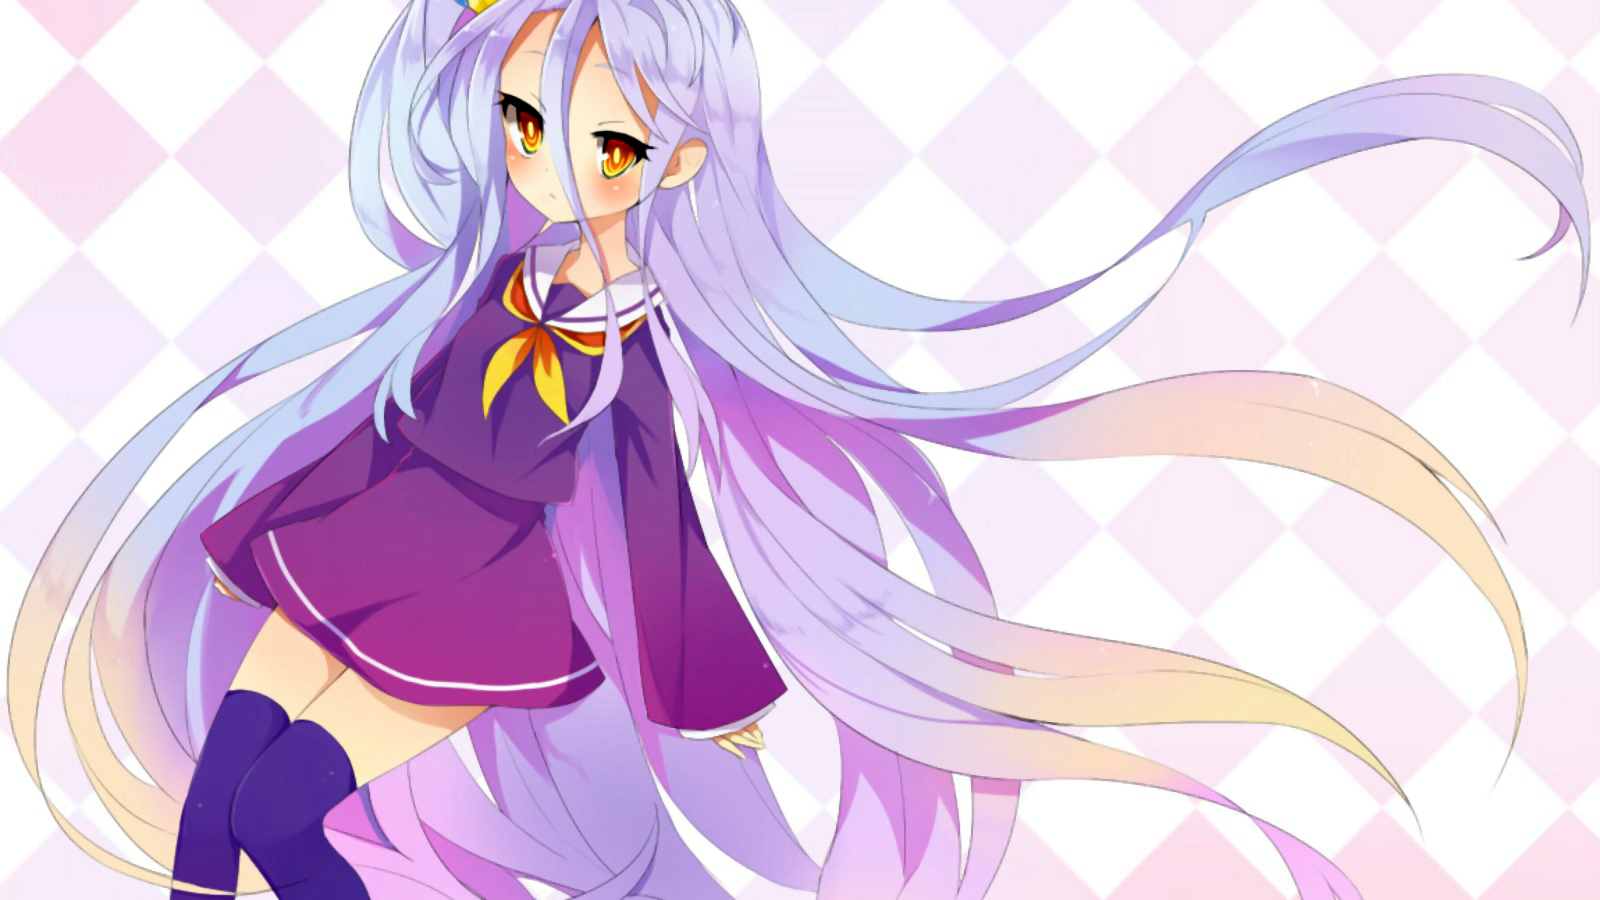 This Cool Shiro No Game Life Girl And Background For Desktop